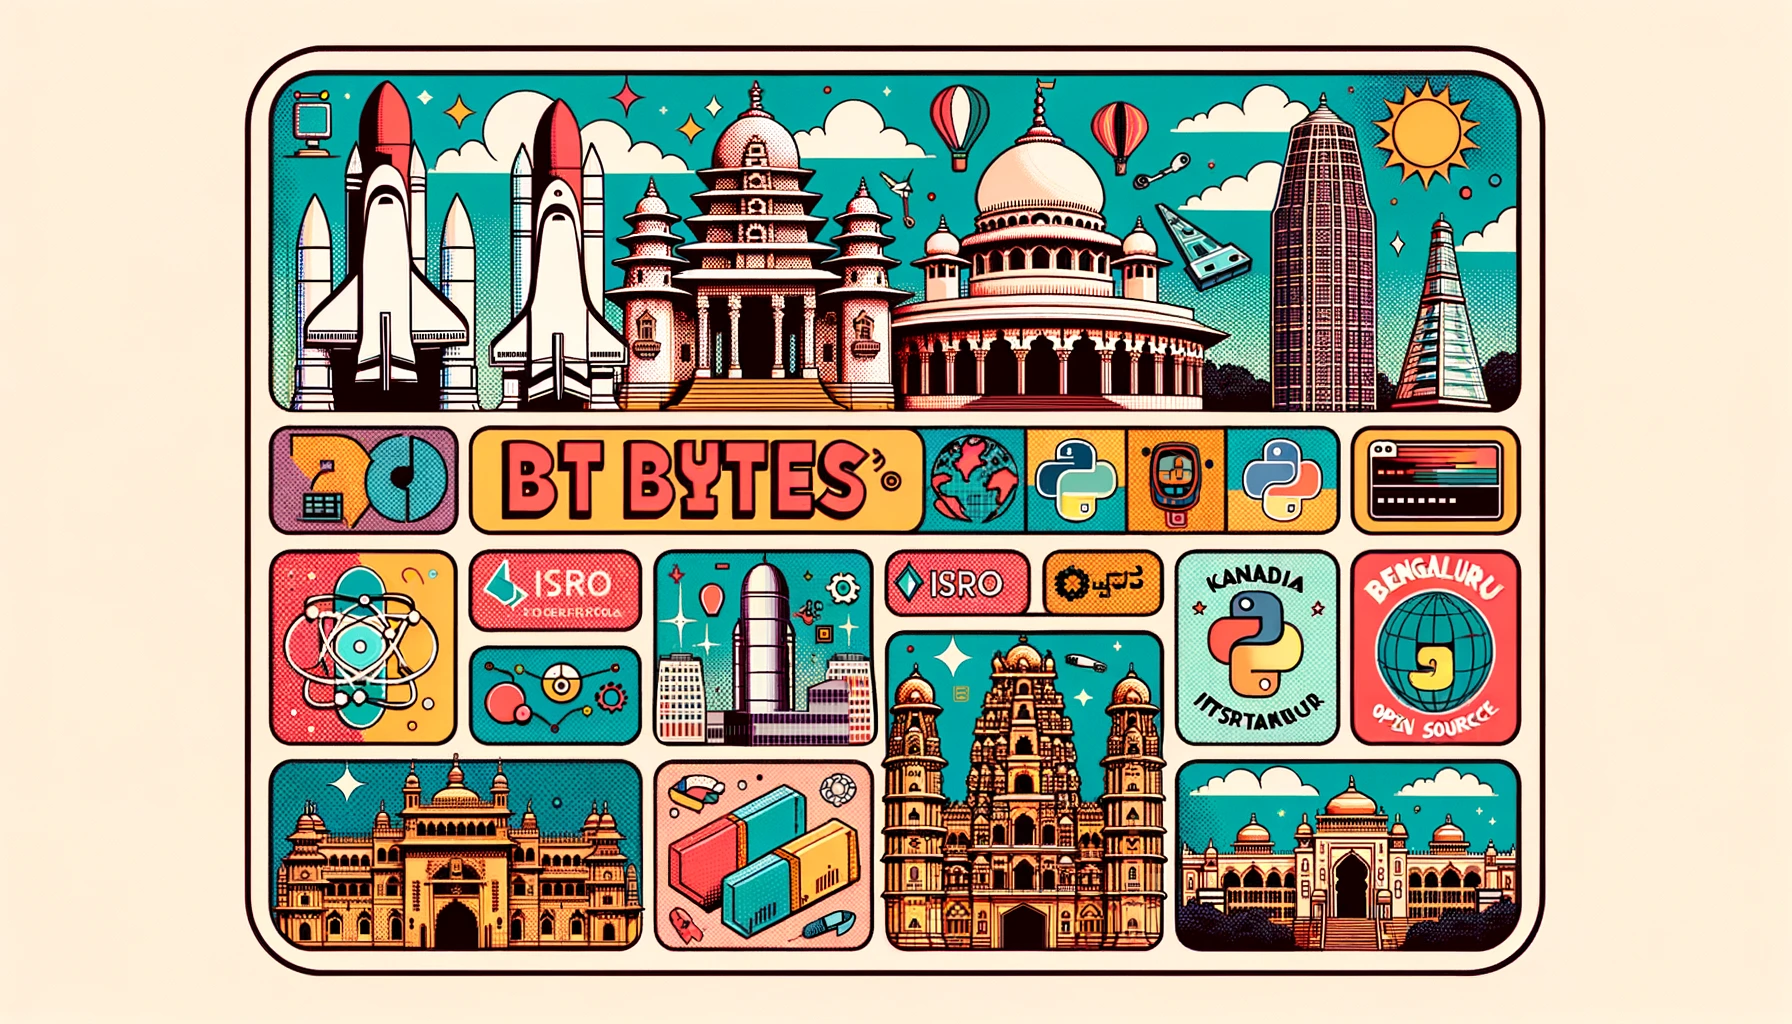 2D mid 20th century comic styled rectangular logo in pastel colors. 'BTBYTES' is emblazoned at the top, alongside illustrations of Bengaluru's landmarks, including the Bull Temple, ISRO's space research infrastructure, and the Indian Institute of Science facade. Directly below, the words 'BENGALURU', 'KANNADA', 'PYTHON', and 'OPEN SOURCE' are distinctly showcased in a vintage font. Interspersed throughout are technology icons, subtle Kannada script touches, representations...The overall design is a vibrant fusion of retro charm with contemporary elements.